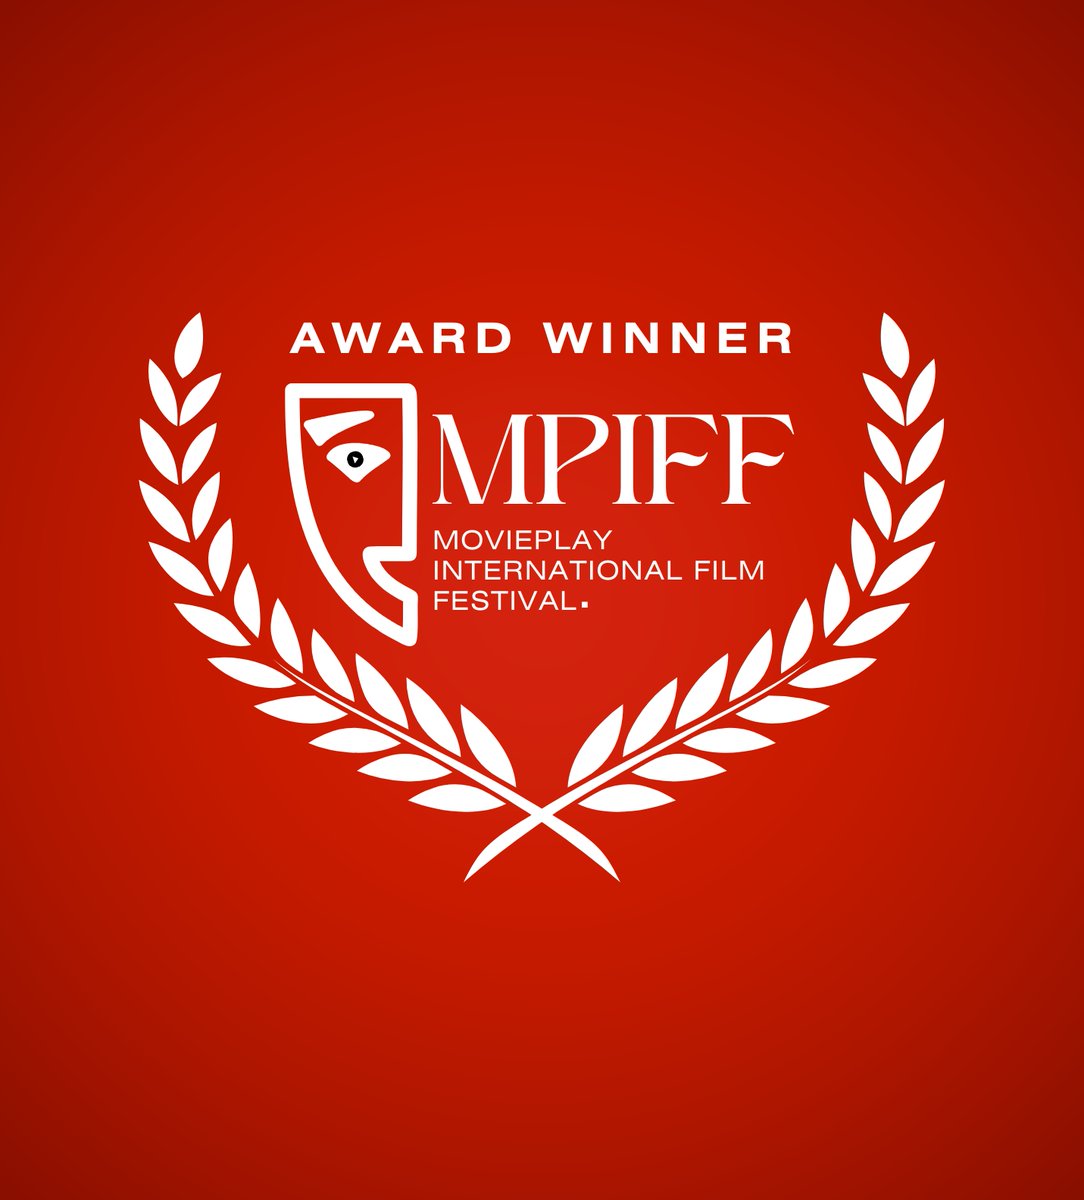 Really appreciating this Award from @MoviePlayIFF ! What a friendly group they are running this event. It’s so refreshing to enter a festival with such wonderfully open lines of communication. 

#screenplaycontest #writerscommunity #filmmakers #filmawards #tvpilotscript